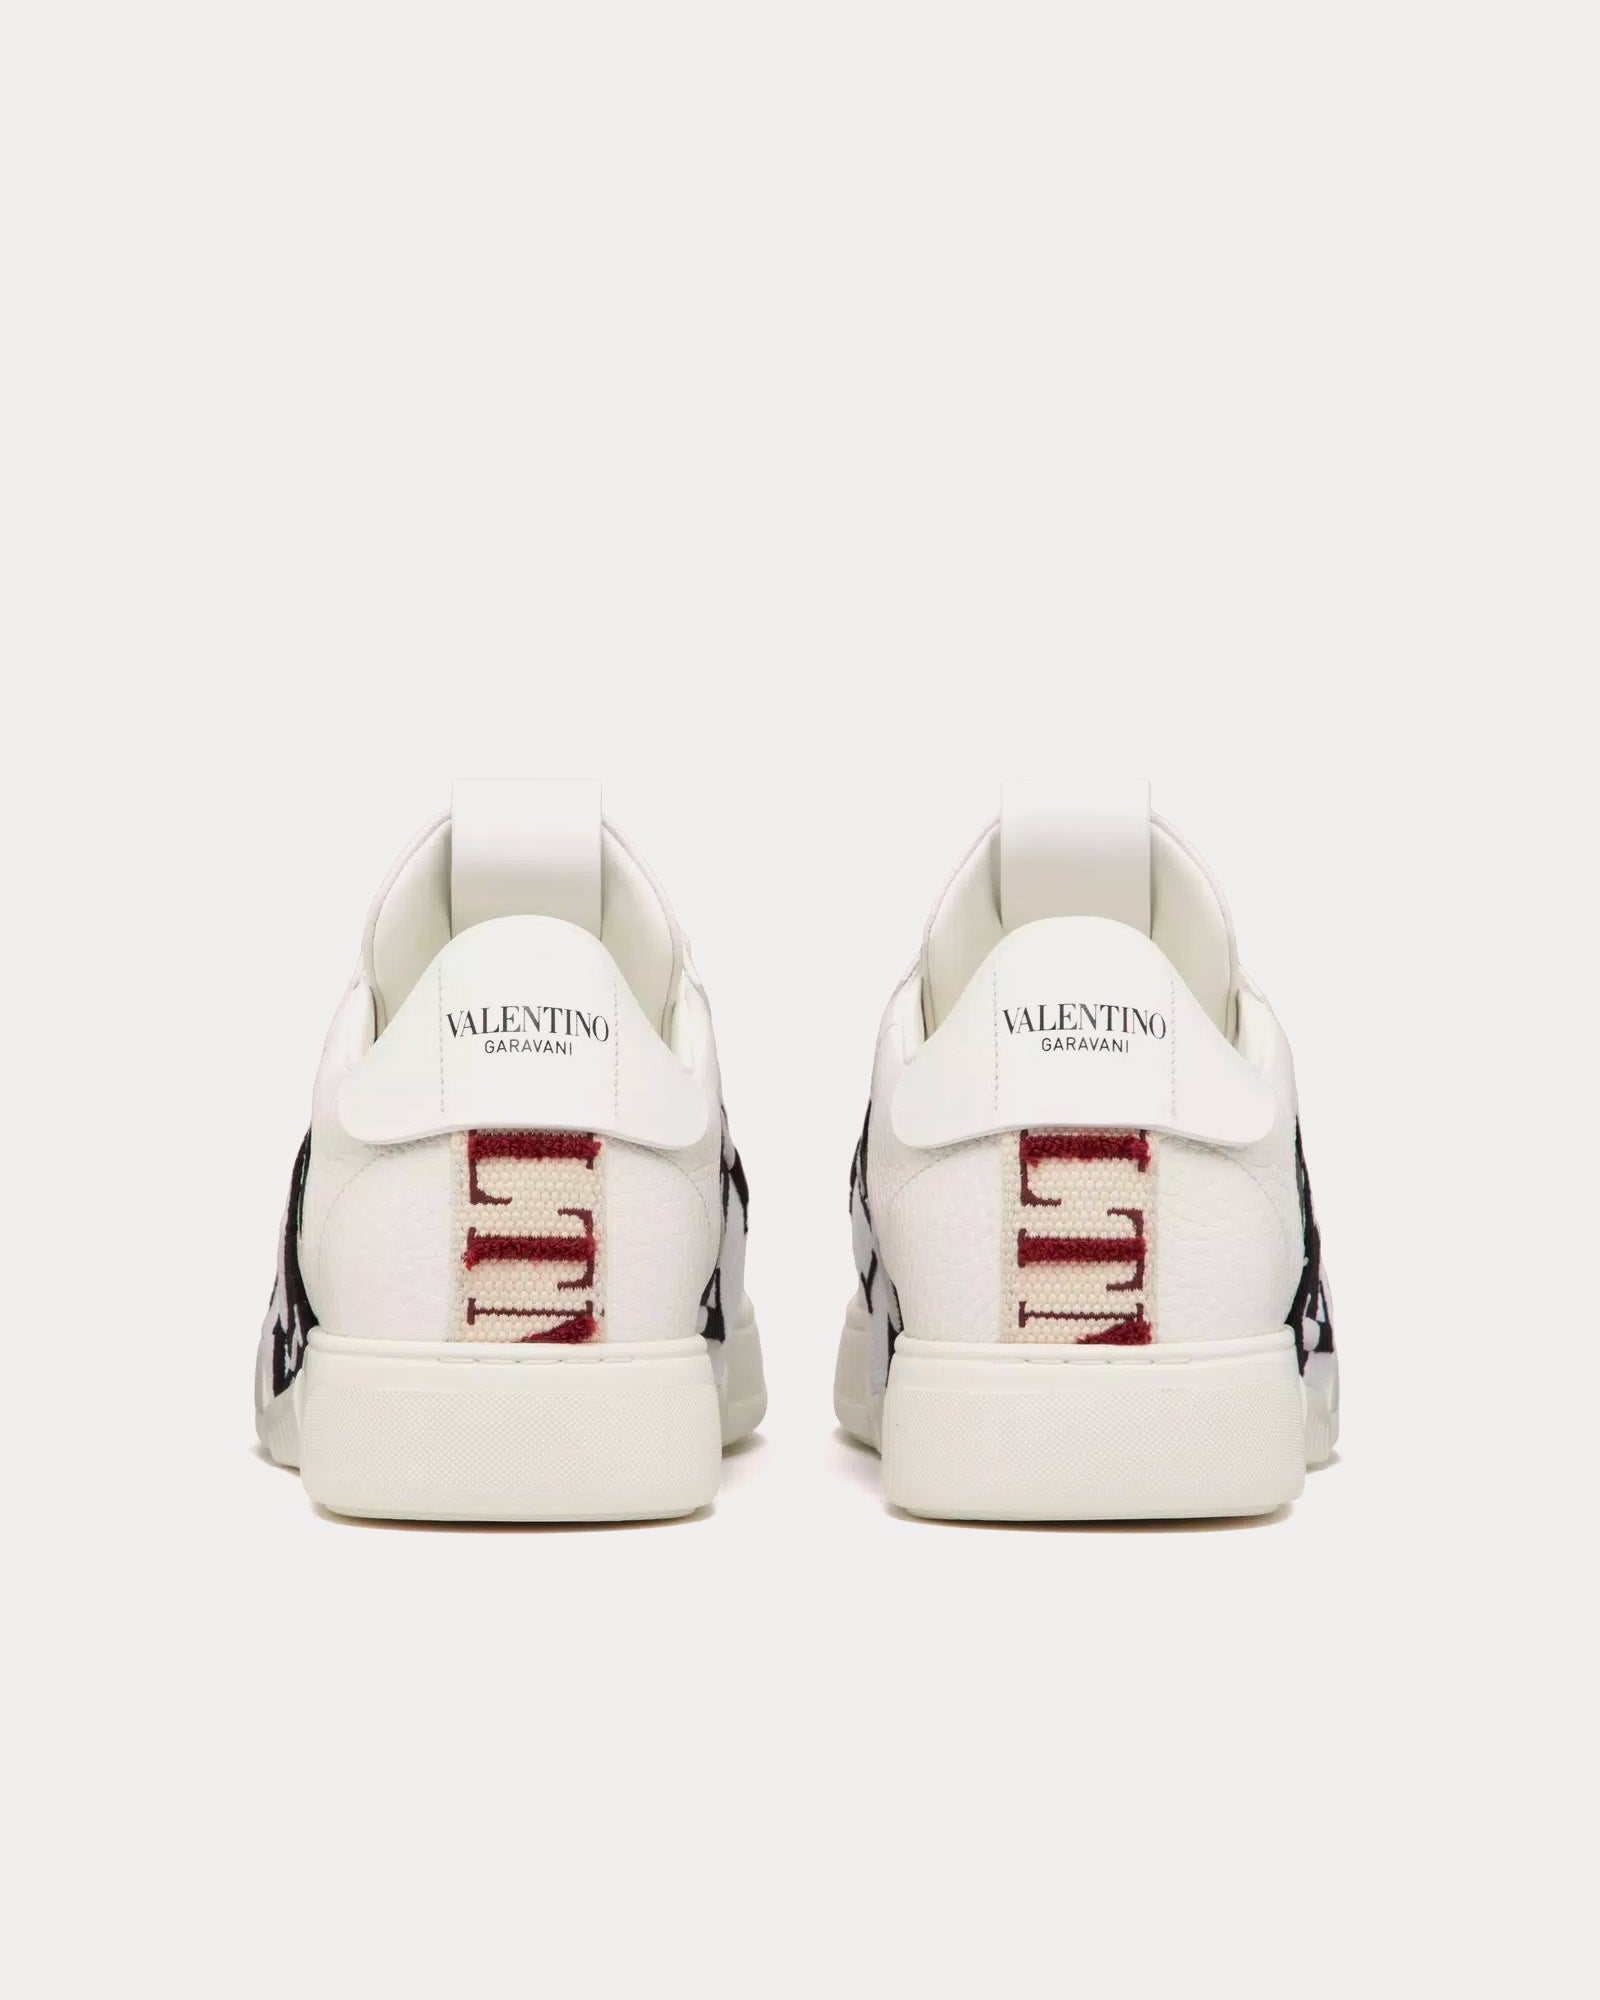 Valentino - VL7N Calfskin & Fabric Banded White / Black / Mint / Ruby Low Top Sneakers